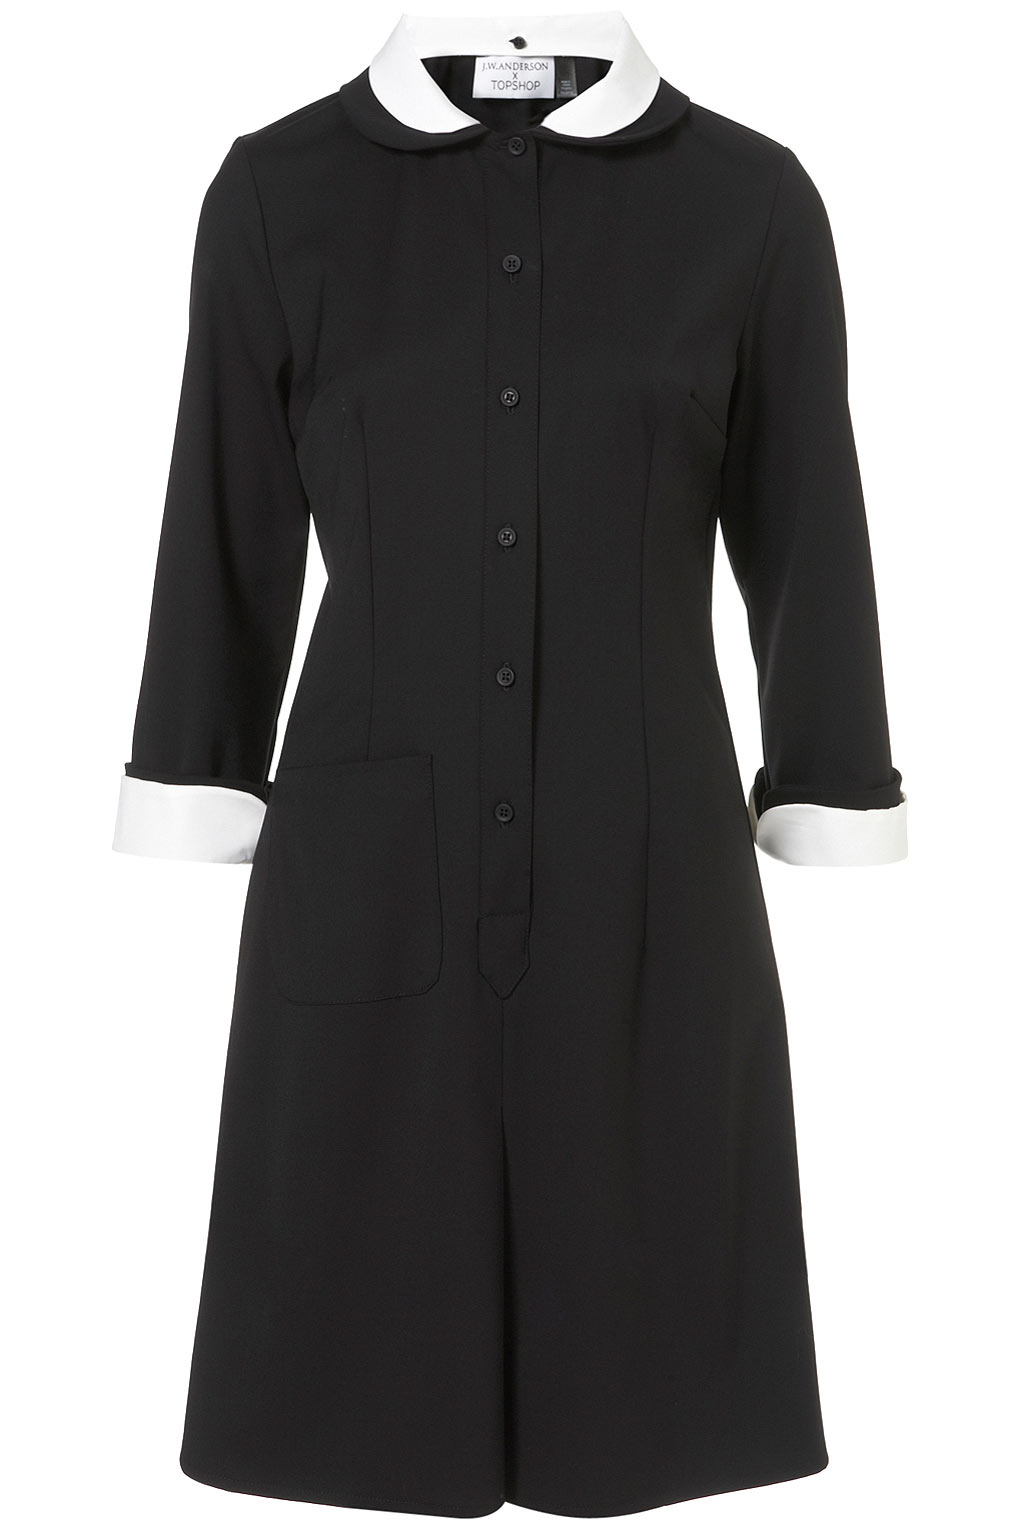 Topshop French Maids Dress in Black | Lyst